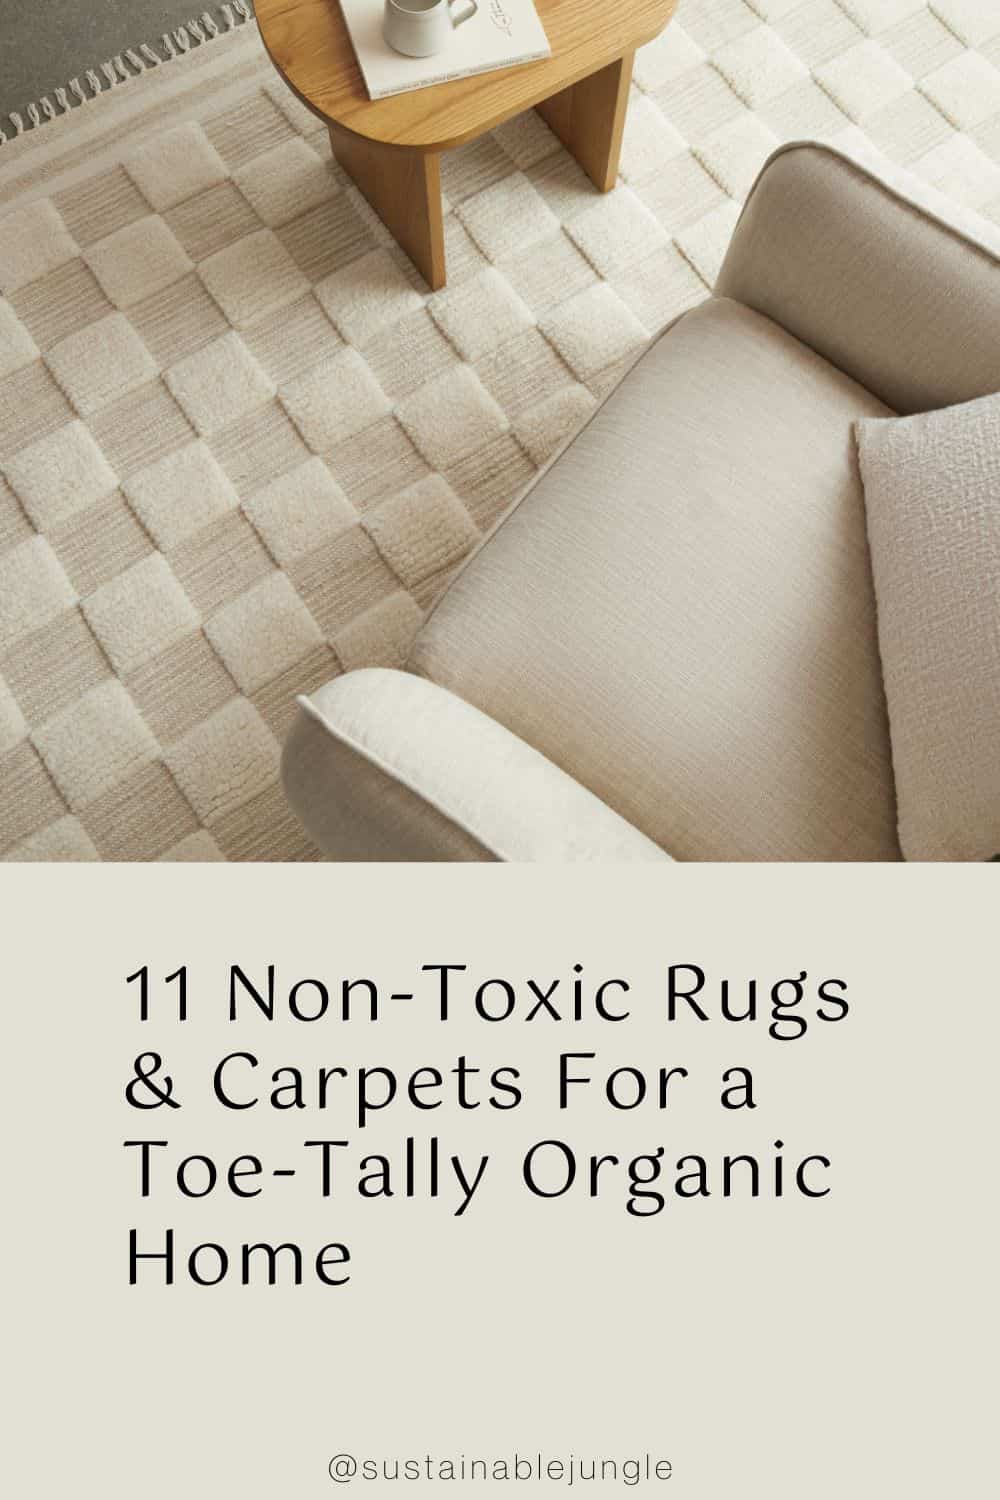 11 Non-Toxic Rugs & Carpets For a Toe-Tally Organic Home Image by Parachute #nontoxicrugs #nontoxicarearugs #organicrugs #organiccottonrugs #organicwoolrugs #nontoxiccarpet #sustainablejungle